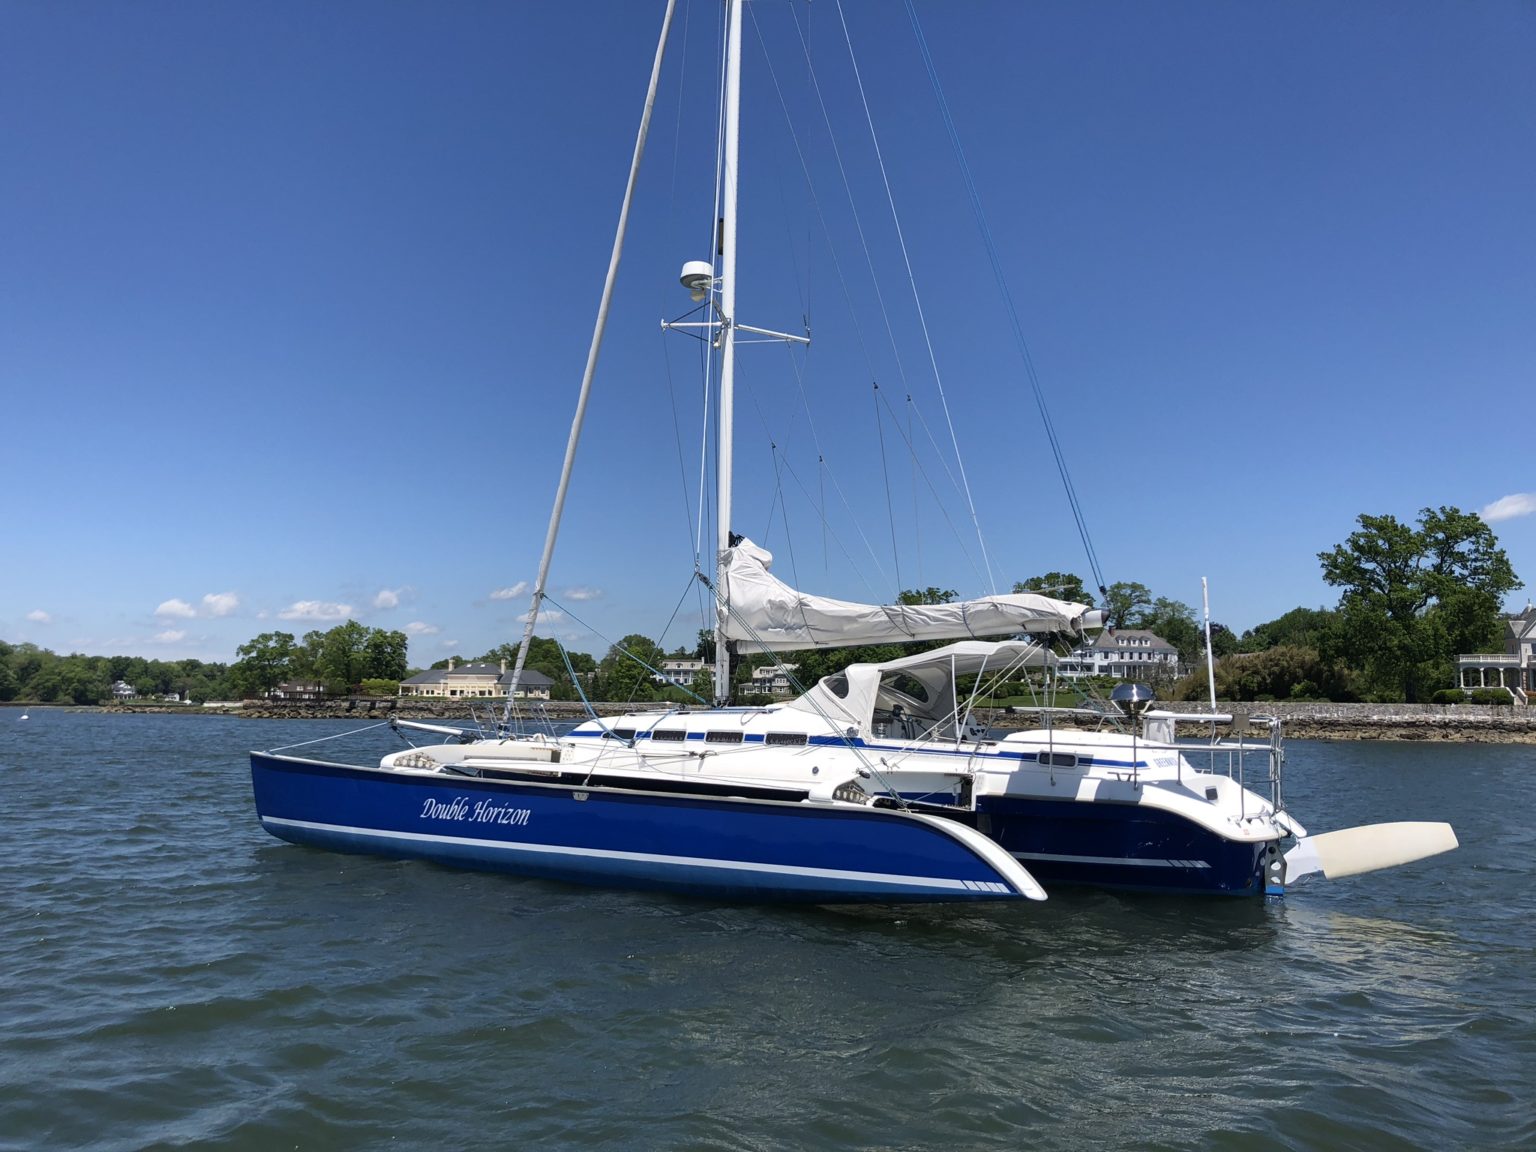 dragonfly trimaran for sale usa